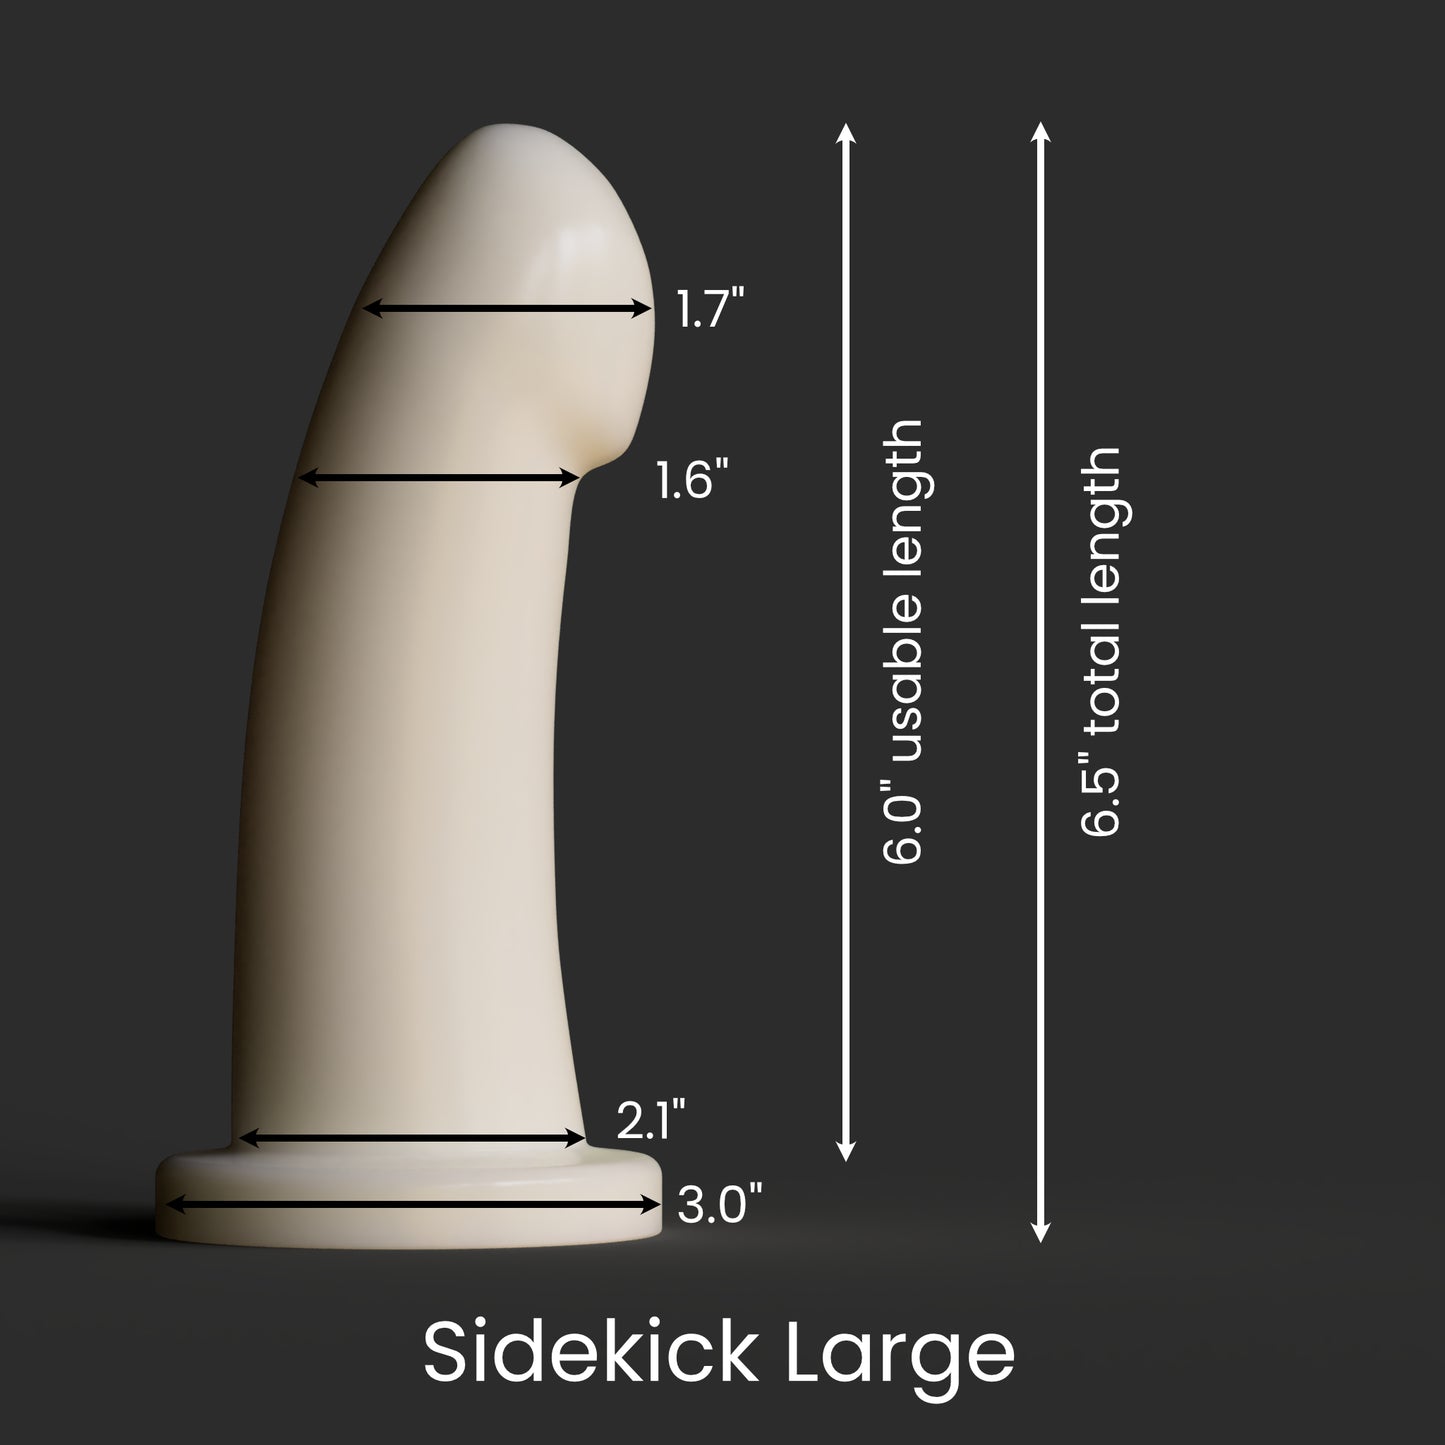 Diagram showing the dimensions of the Sidekick Large as described in the product description.